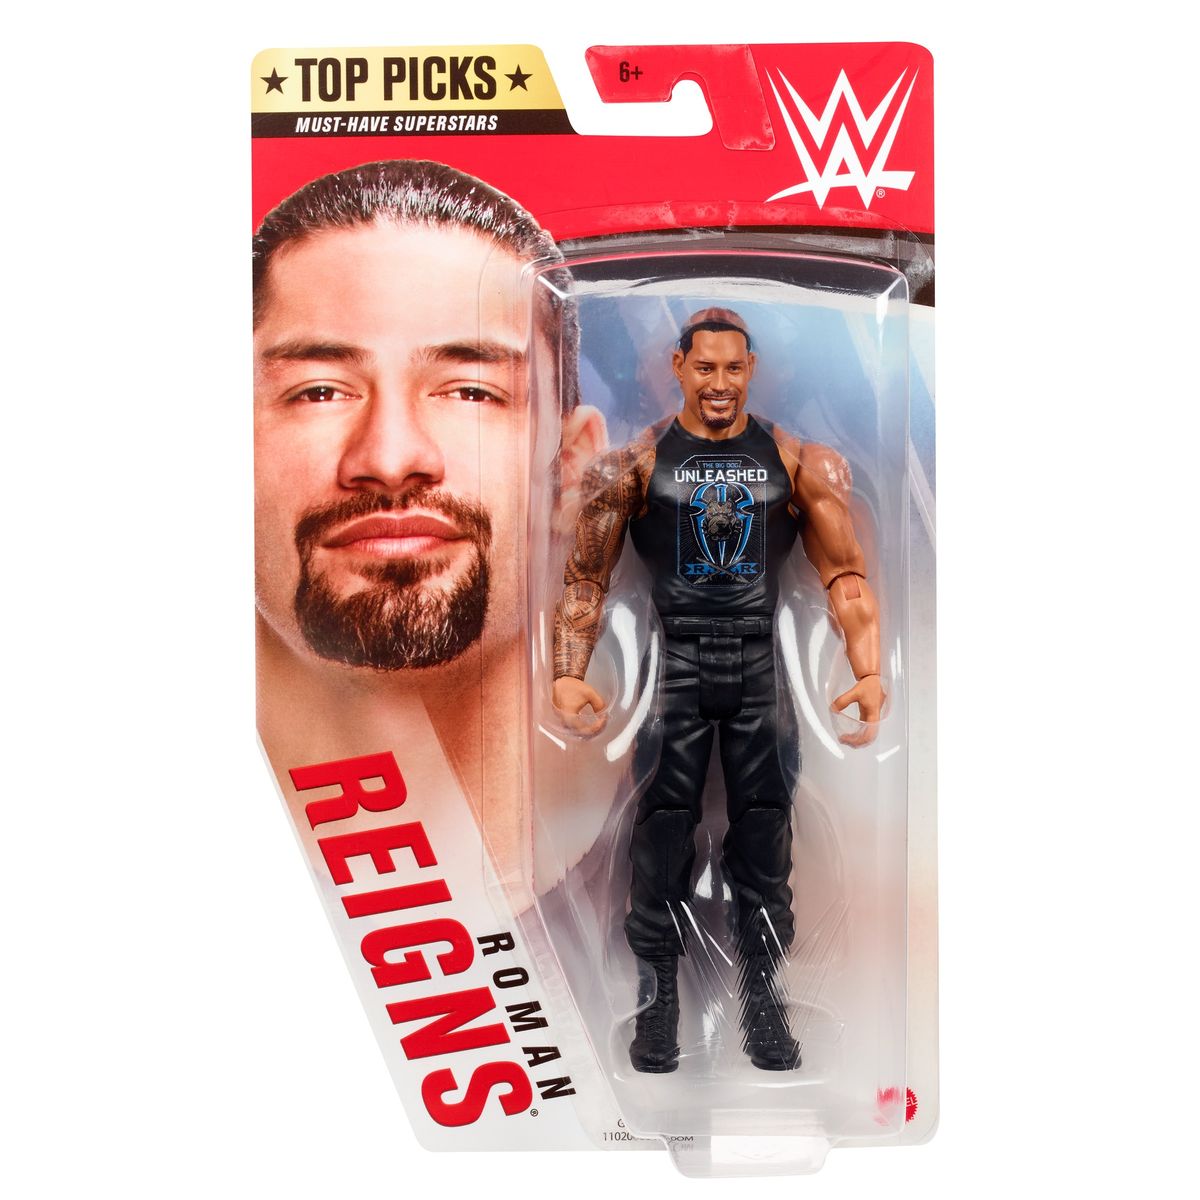 Wwe Top Picks 6 Inch Action Figures Roman Reigns Buy Online In South Africa Takealot Com